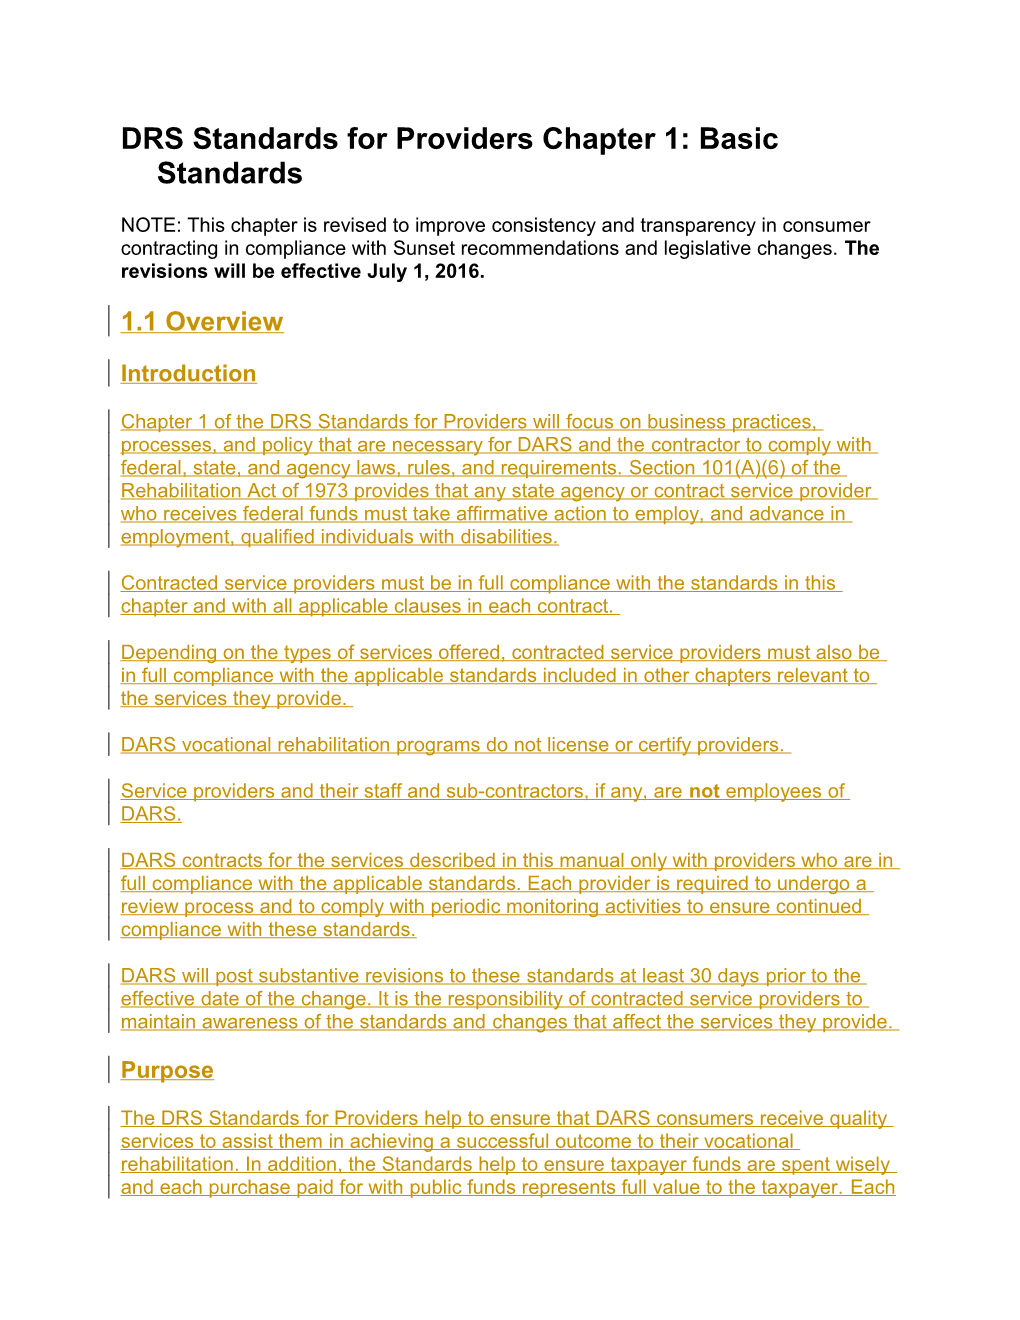 DRS Standards for Providers Chapter 1, Revisions Effective July 2016